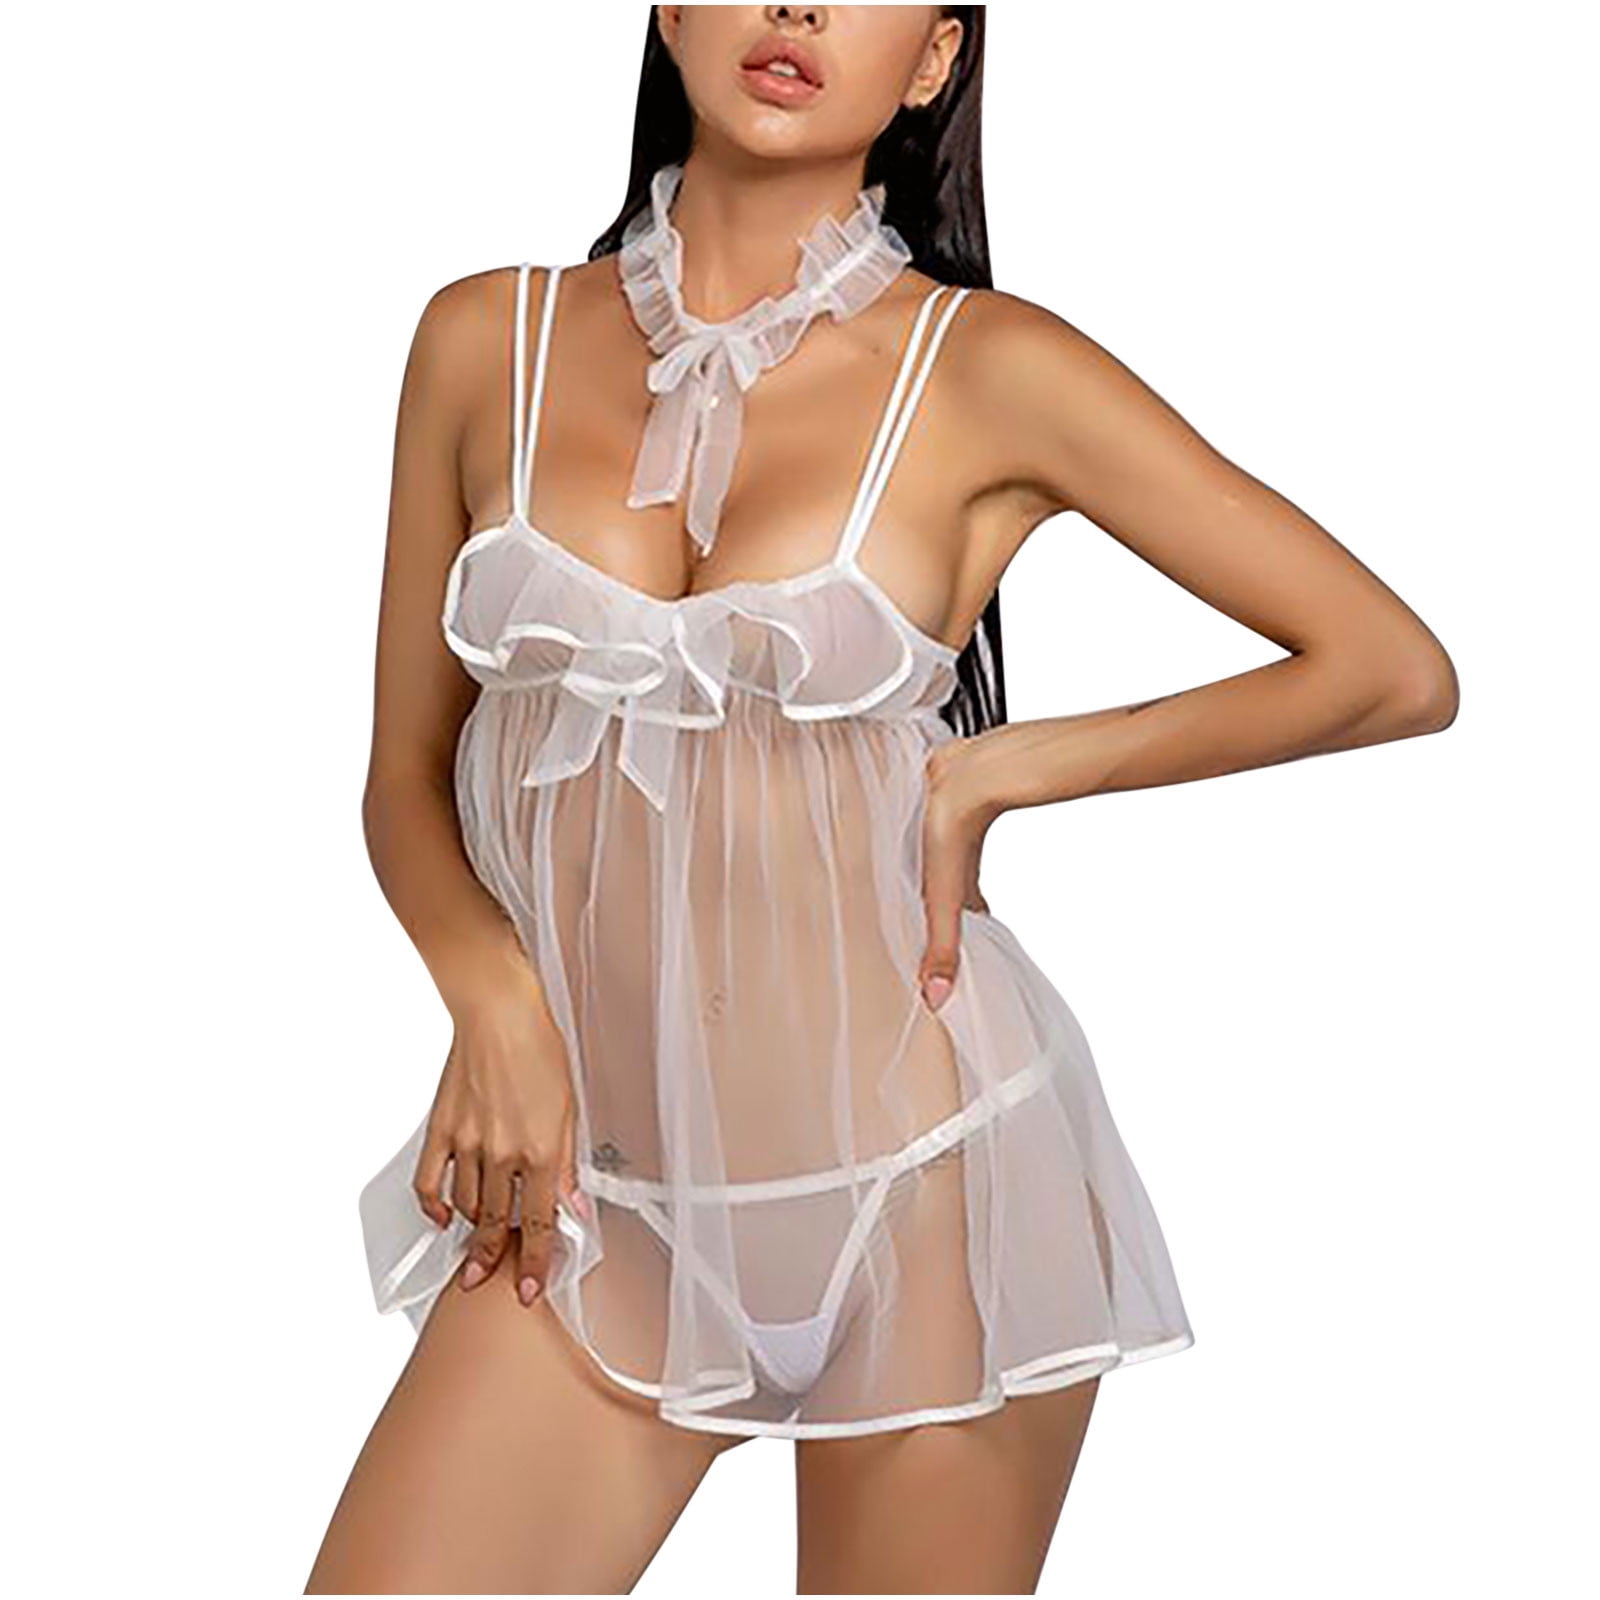 Plus Size Bras for Women Womens Sexy Lace Cosplay Lingerie Pajamas Erotic Lingerie Split Sexy Lingerie Lace Mesh Lingerie Sexy Sets Lace Lingerie image picture